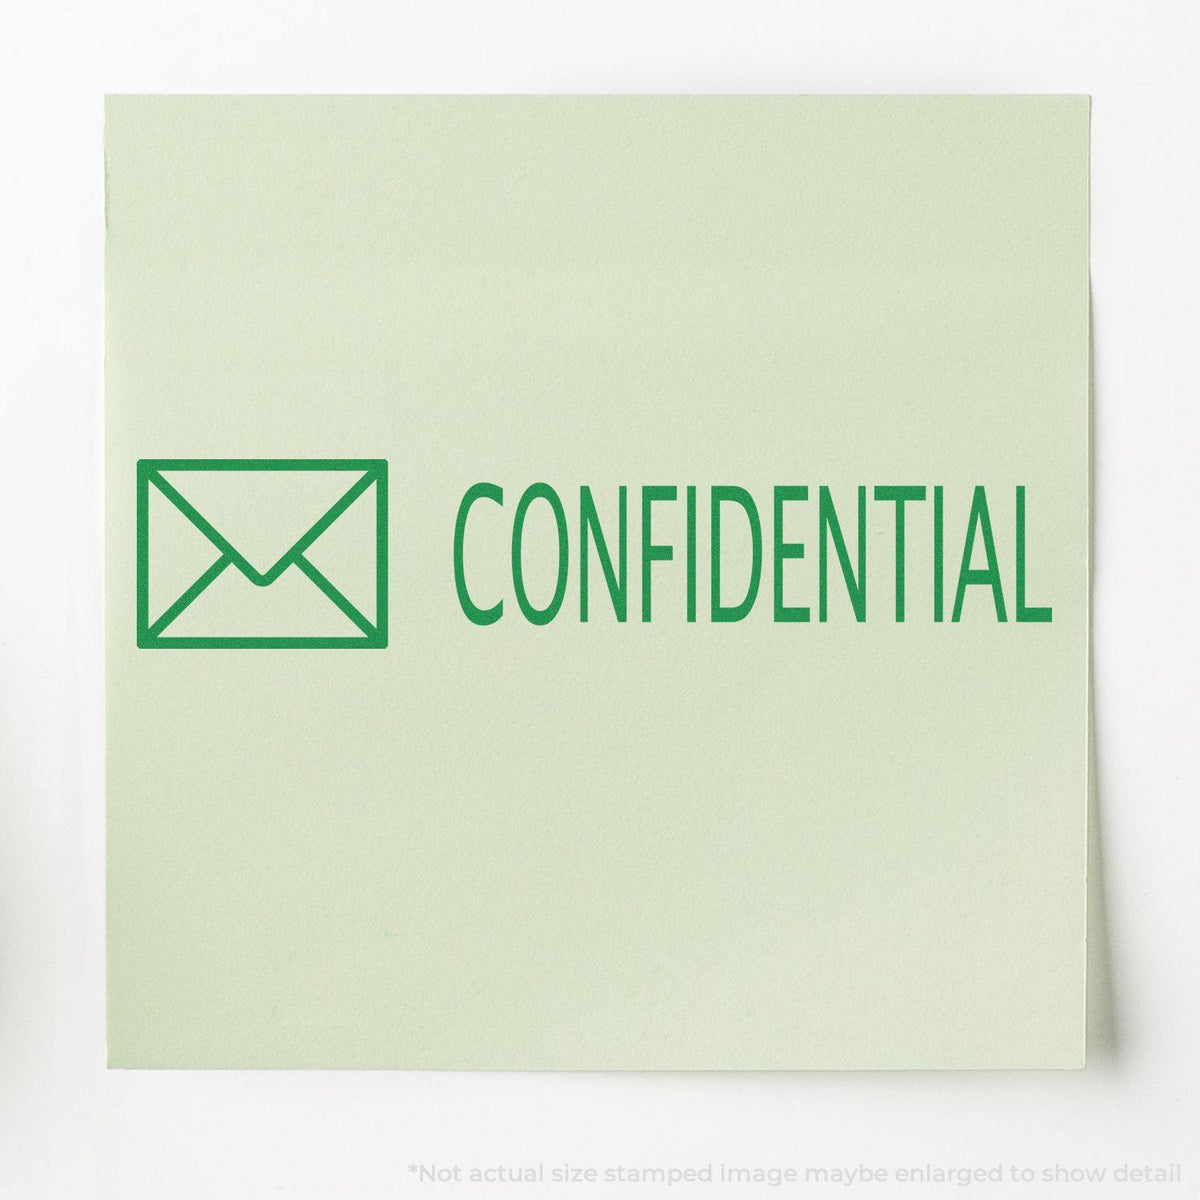 Slim Pre-Inked Confidential with Envelope Stamp In Use Photo